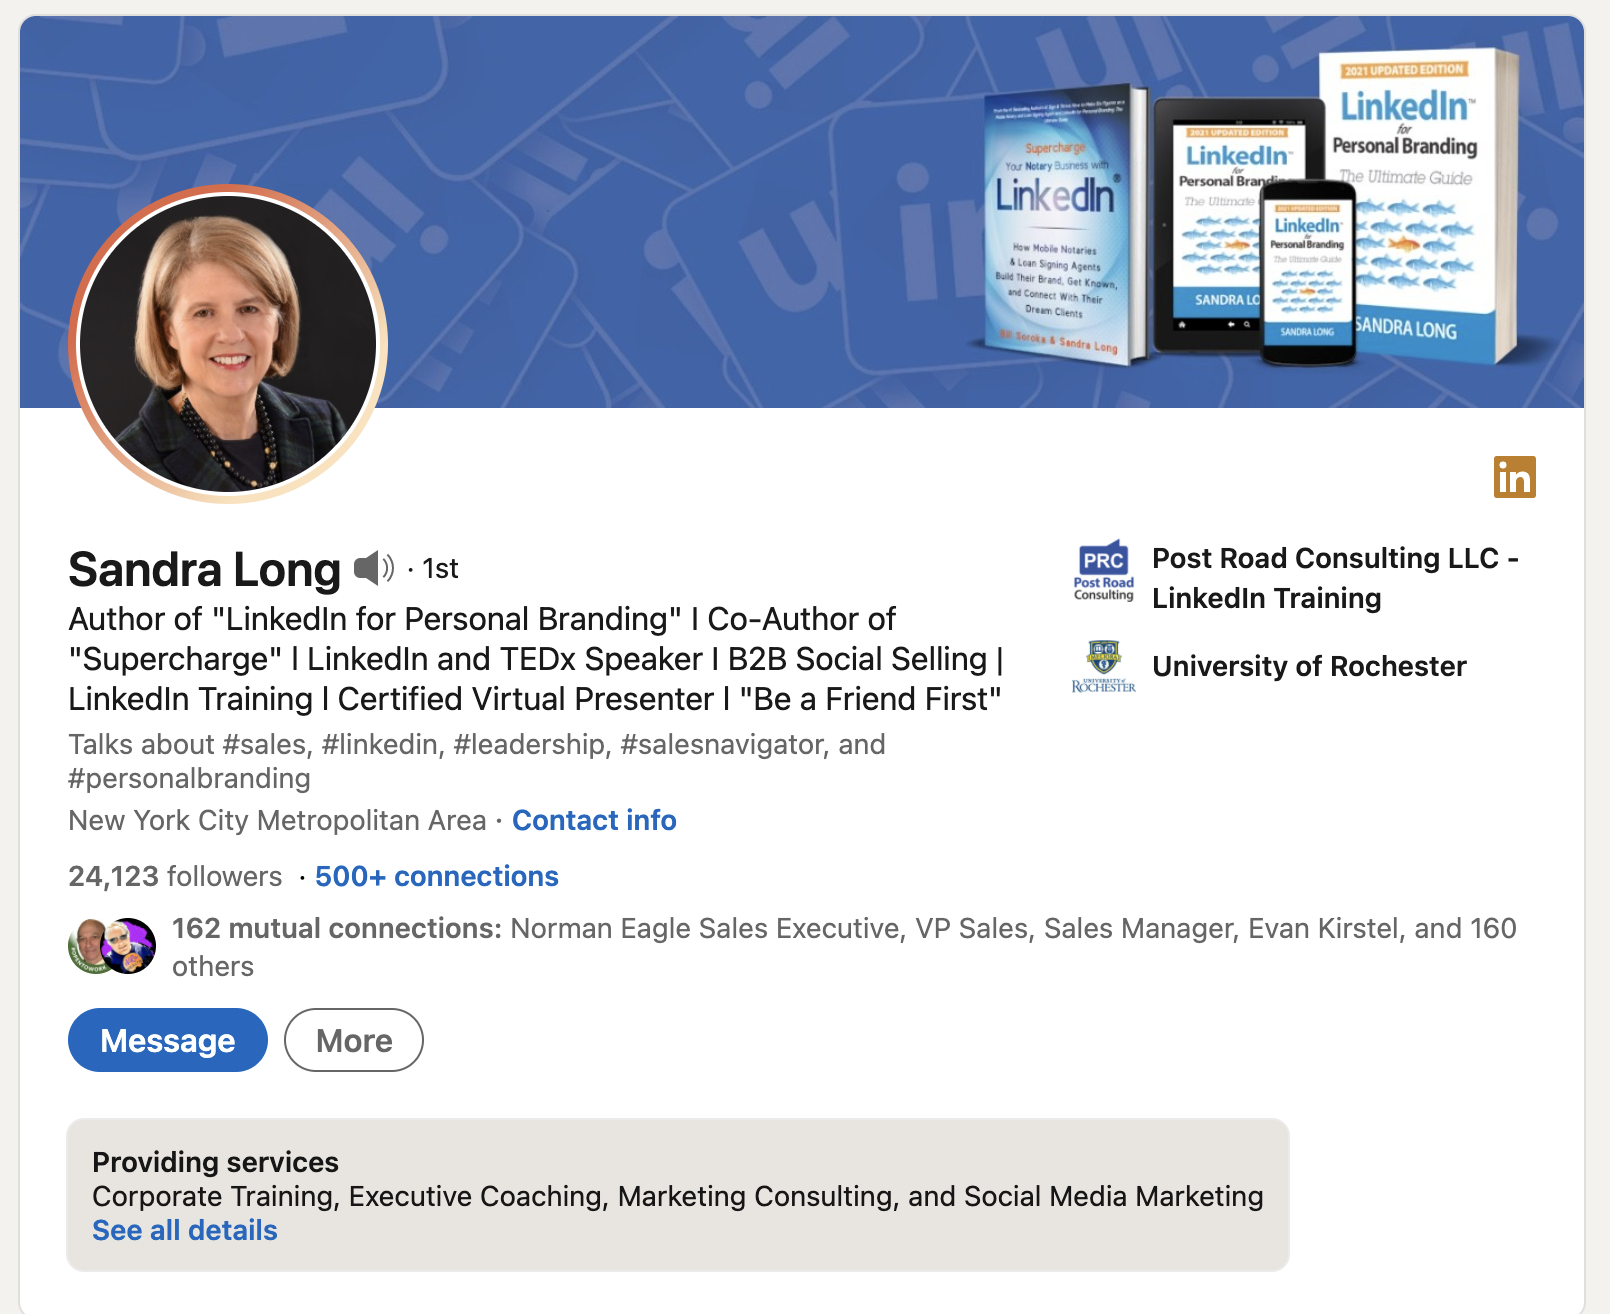 How to Craft an Outstanding LinkedIn Profile as an Older Professional